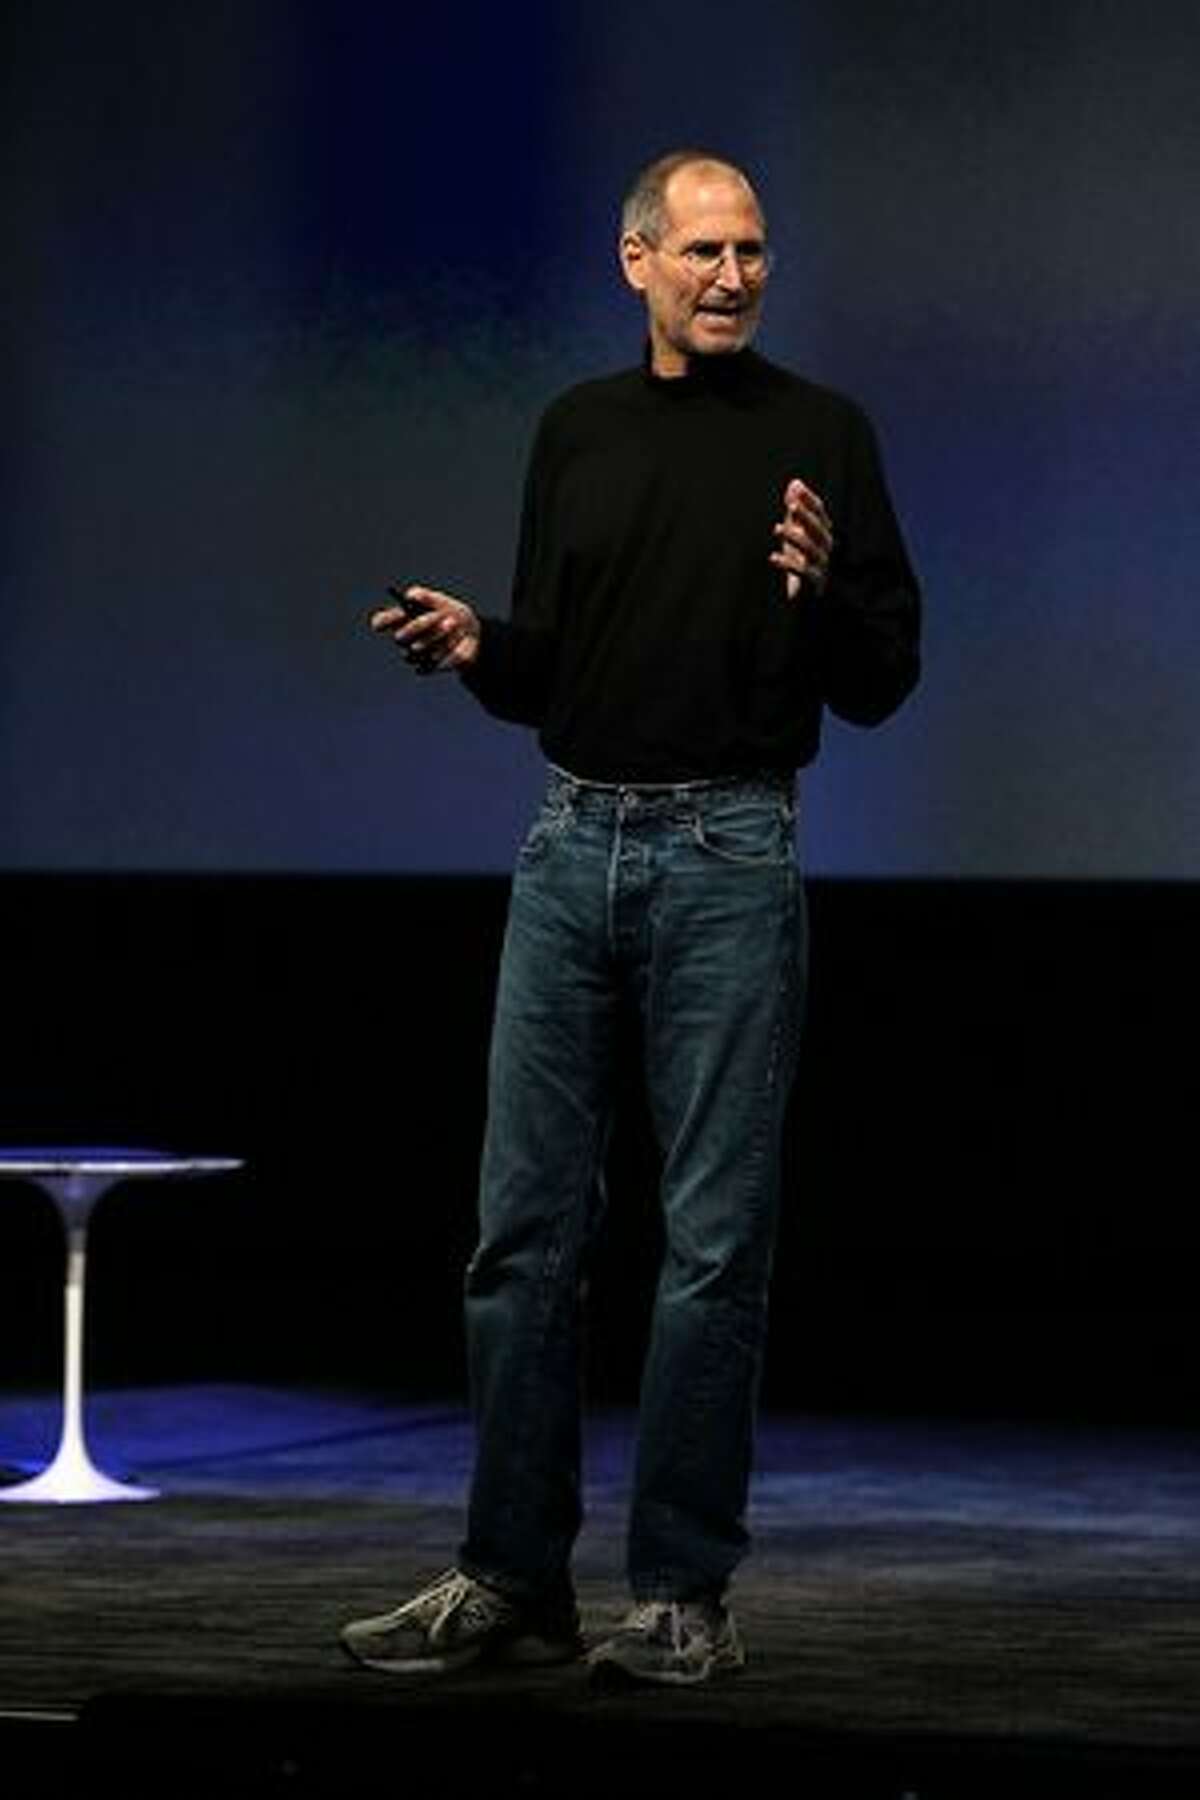 Apple CEO Steve Jobs speaks during an Apple special event Jan. 27 at the Yerba Buena Center for the Arts in San Francisco. Apple introduced its latest creation, the iPad, a mobile tablet browsing device that is a cross between the iPhone and a MacBook laptop.